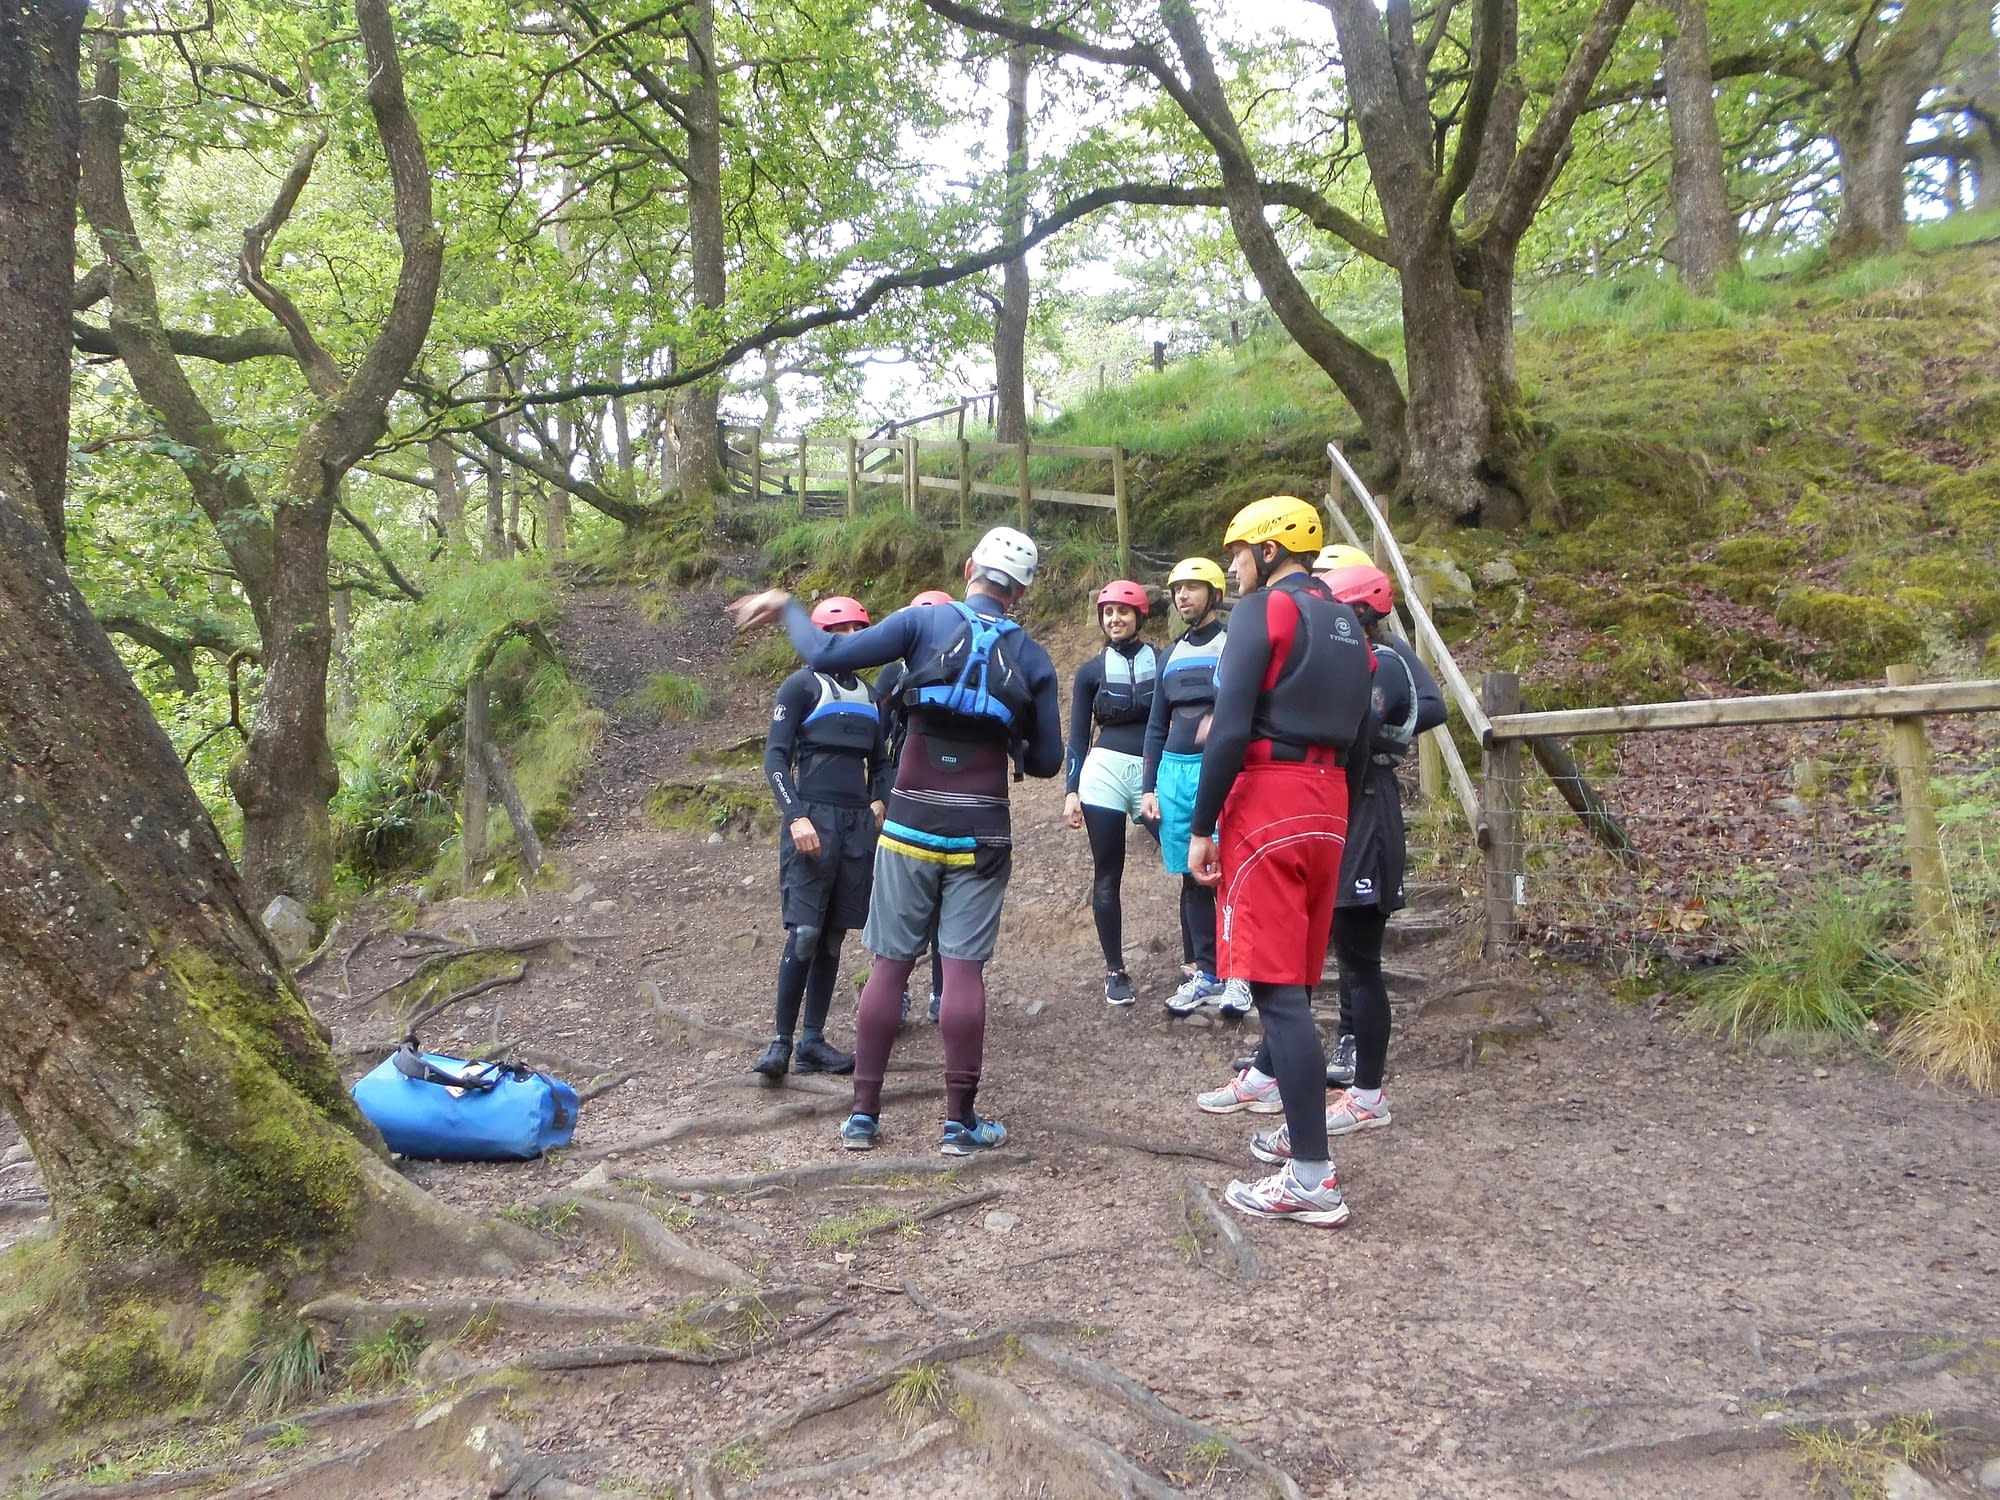 Getting set for a gorge scrambling activity near Cardiff